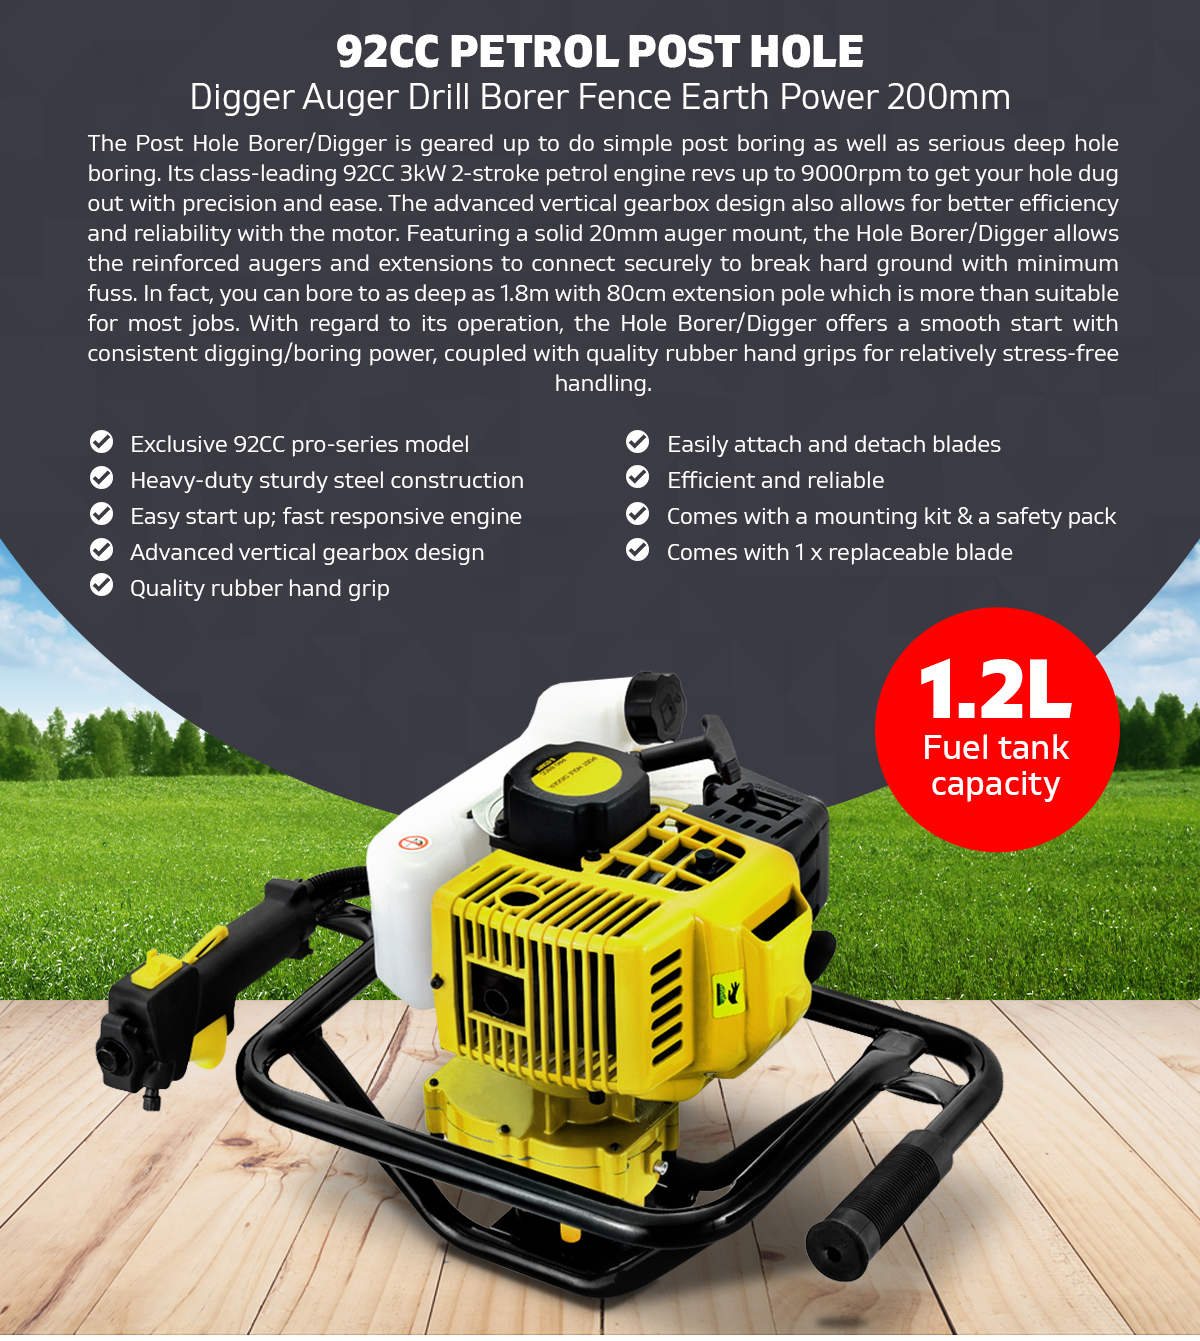 1.2L Petrol Post 92CC Hole Digger Auger Borer Drill Fence Earth 200mm Power